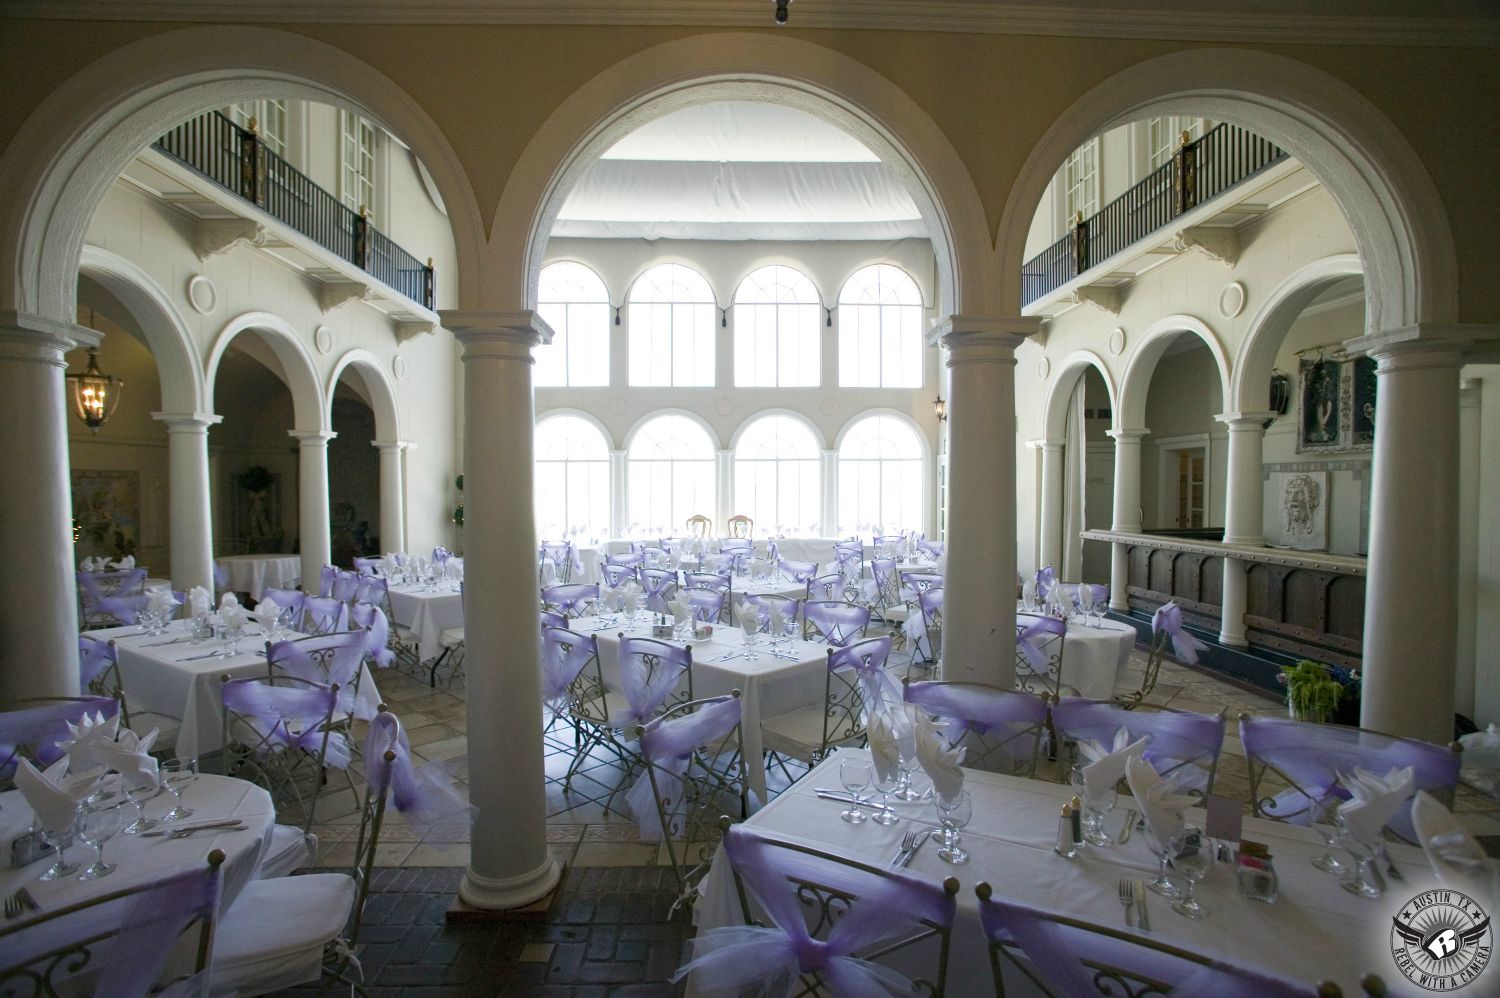 Picture of unbelievably stunning wedding reception venue with lots of windows, arches, and elegantly set tables with lavender chair ties taken by Austin wedding photographer.